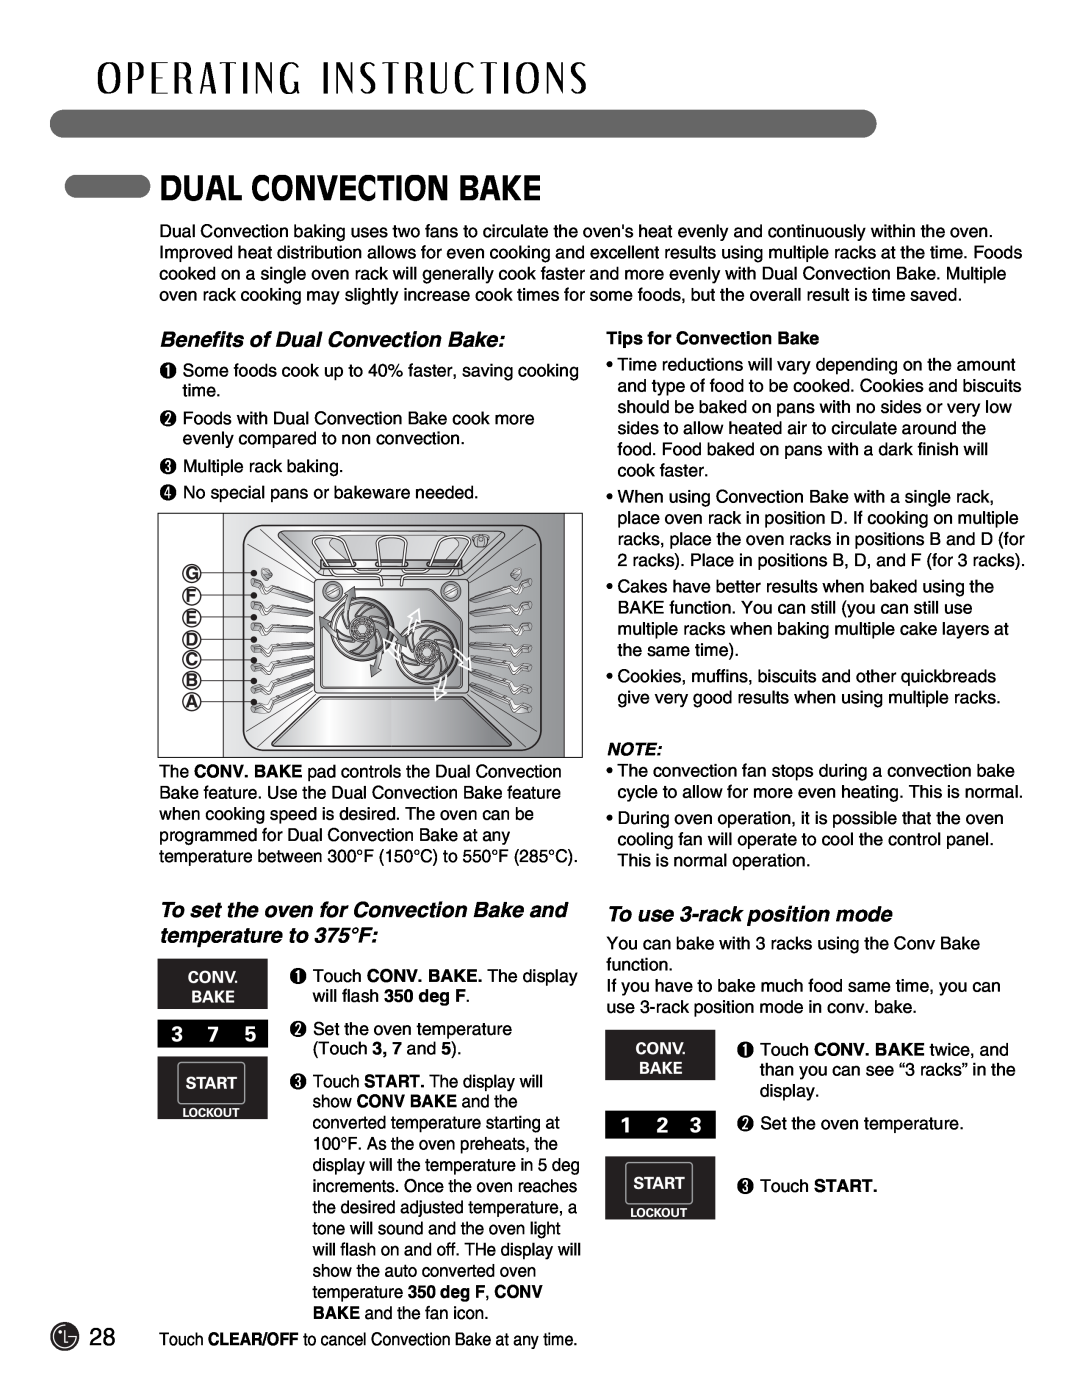 LG Electronics LSE3092ST Benefits of Dual Convection Bake, To set the oven for Convection Bake and temperature to 375F 